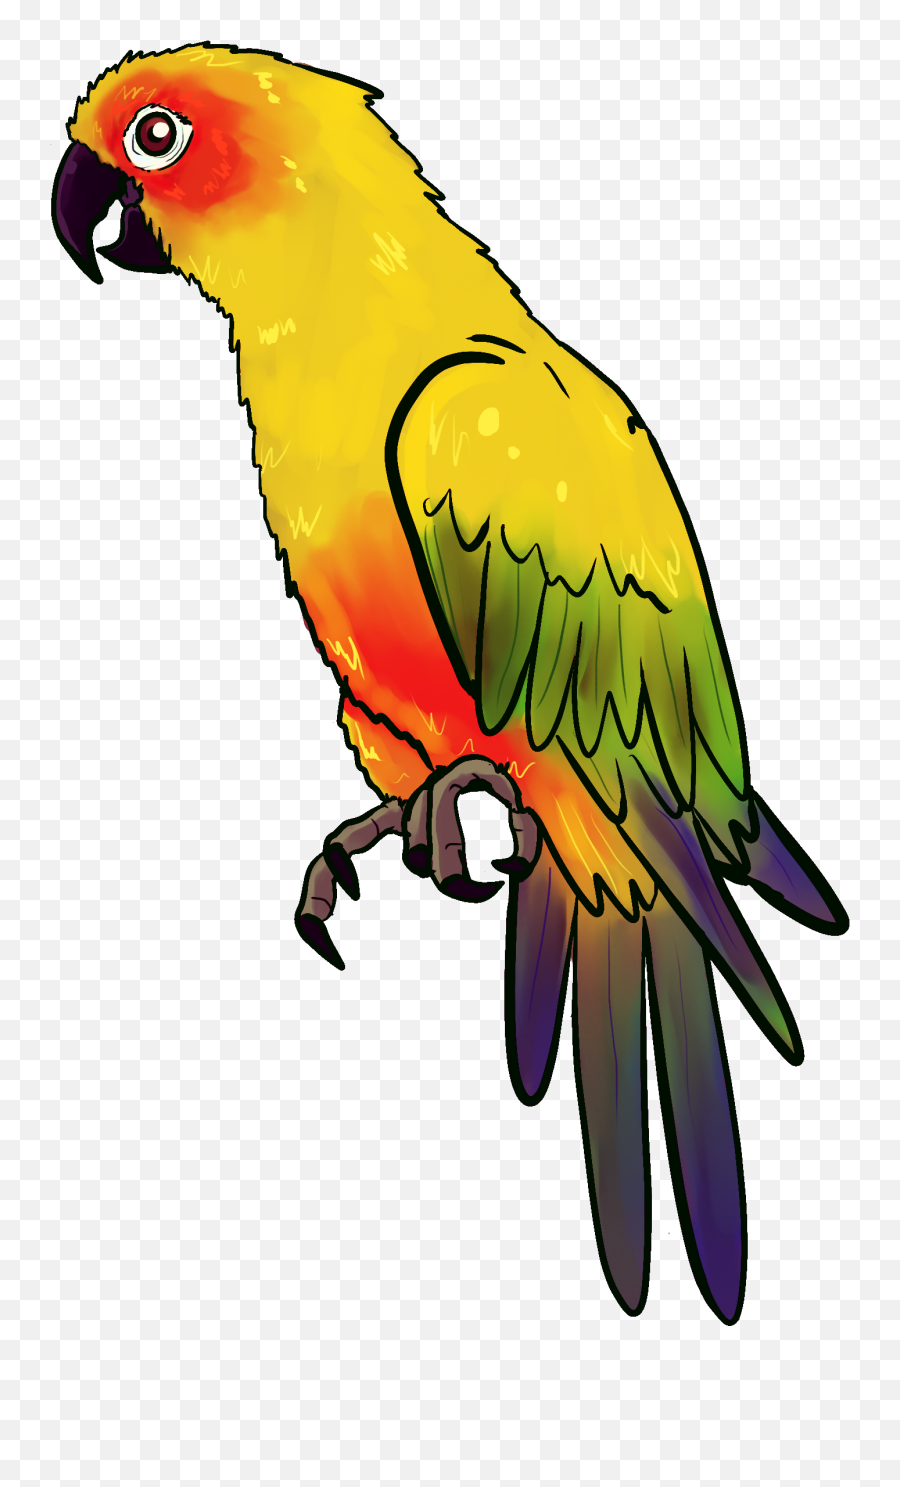 Drawn Parakeet Pirate Parrot - Png Clipart Full Parrot Drawing Png,Parrot Transparent Background